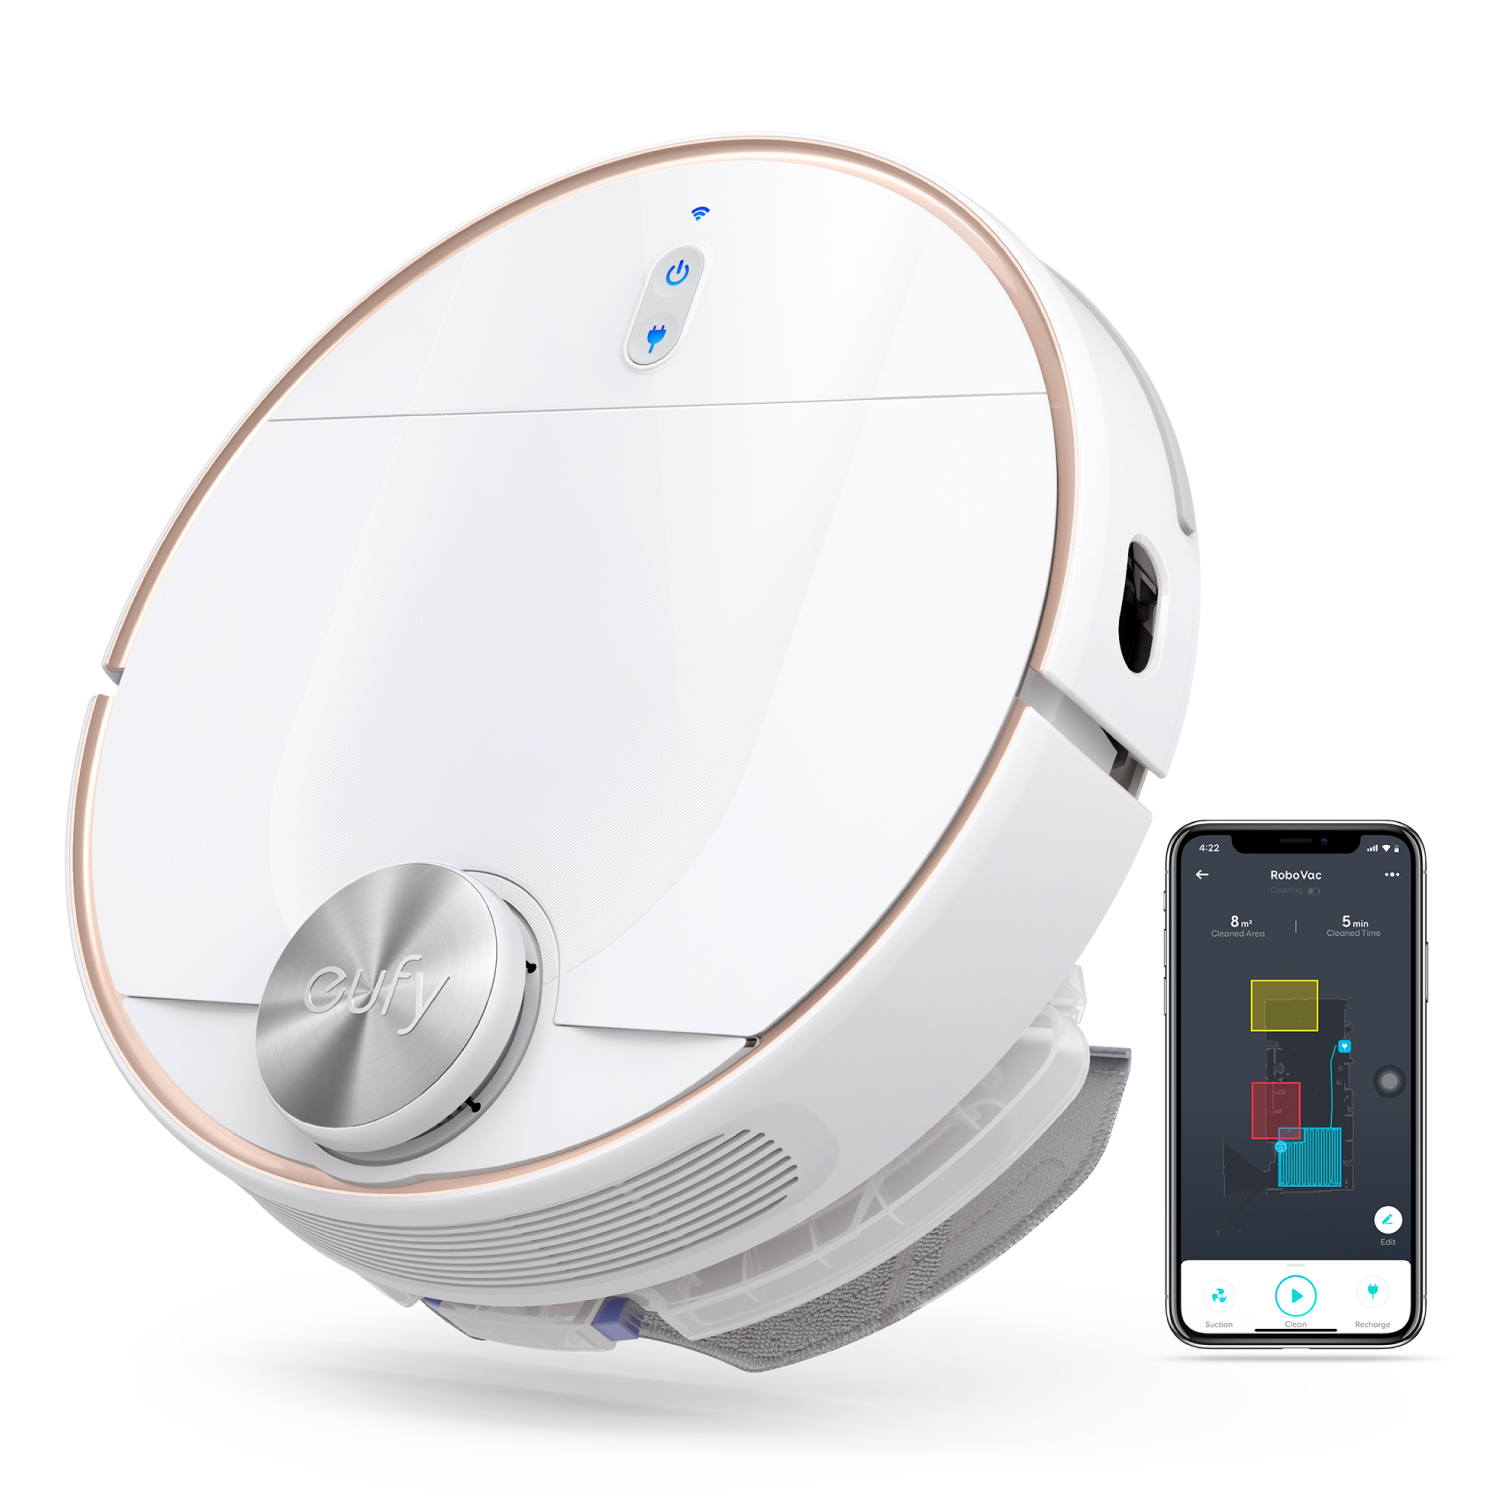 Anker eufy L70 Hybrid Robot 2-in-1 Vacuum and Mop - image 1 of 6